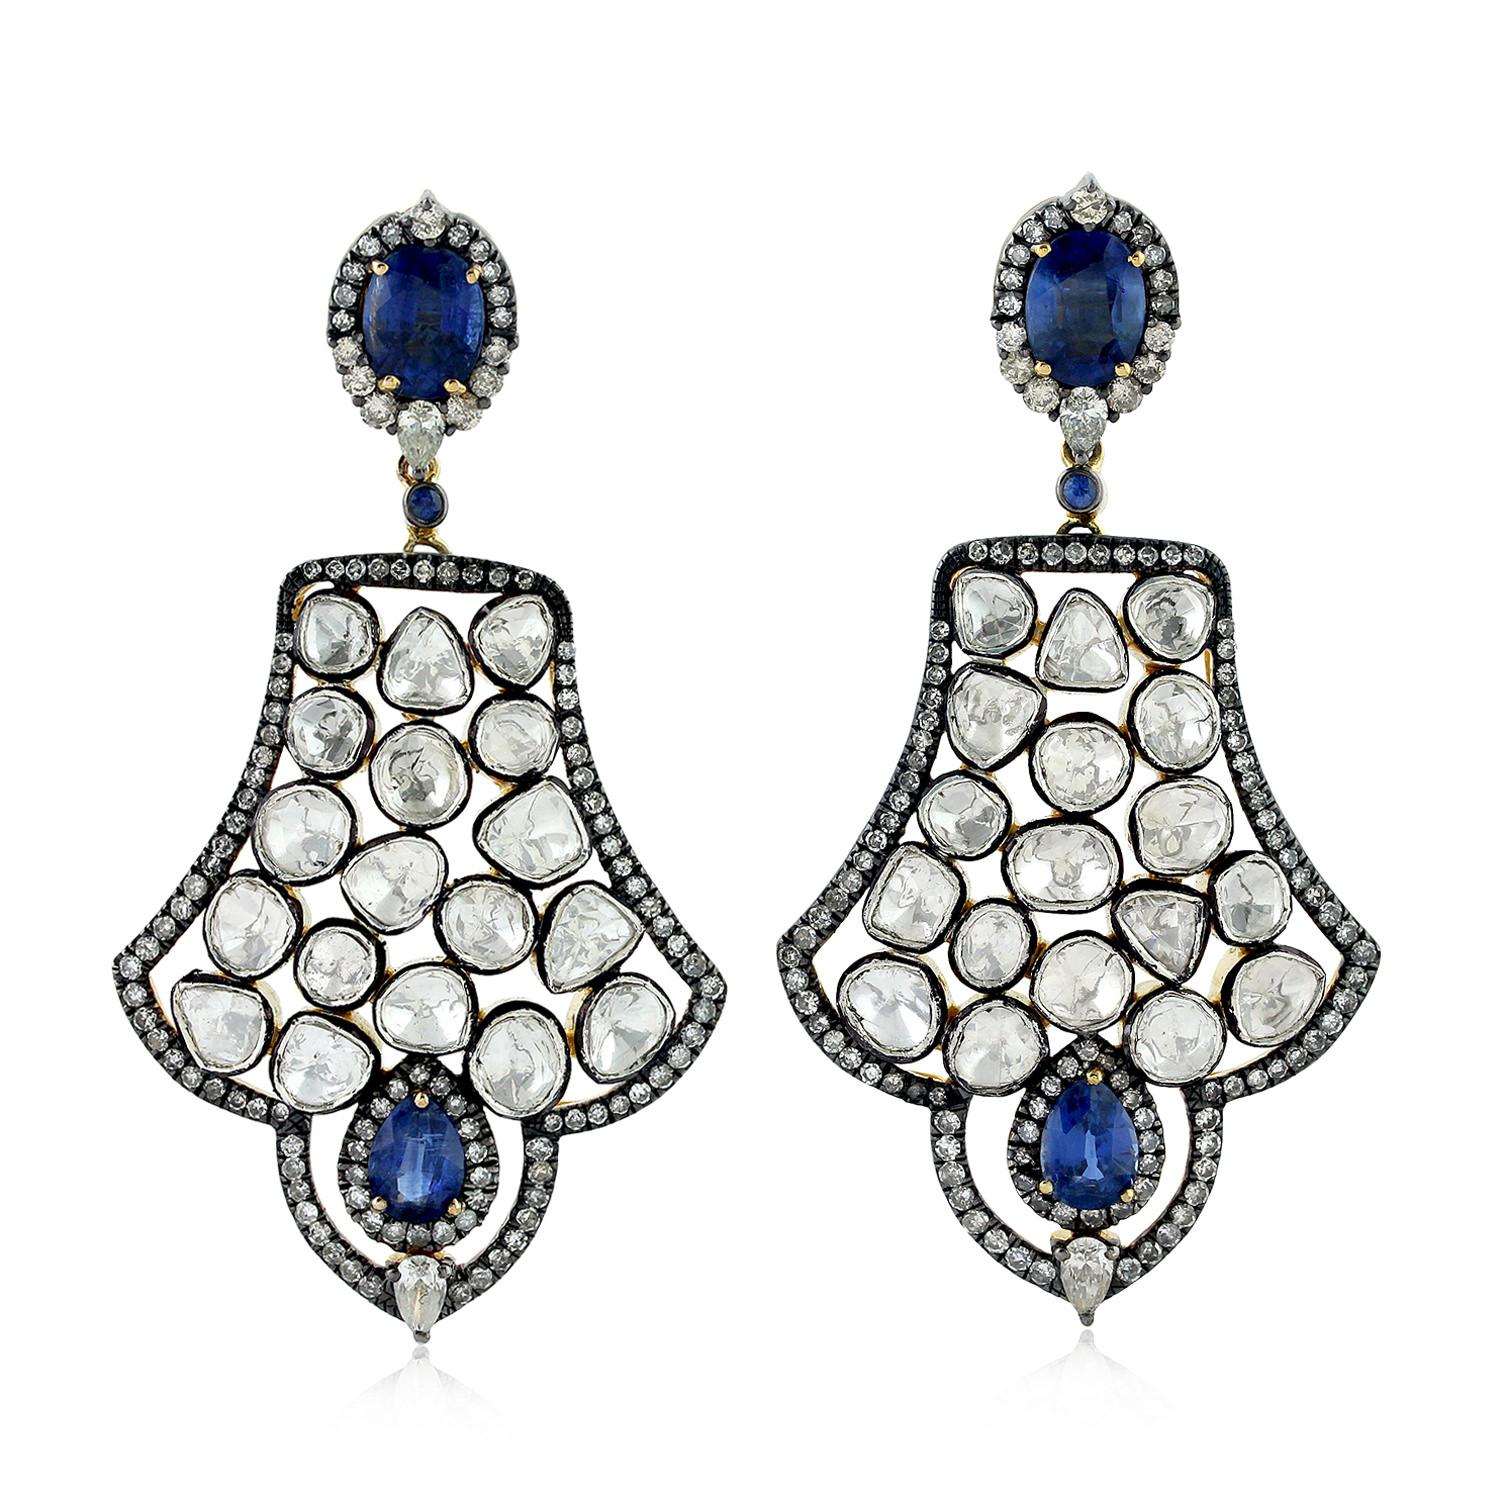 Mixed Cut Rose Cut Diamonds Earrings with Kyanite & Sapphire Made in 18k Gold & Silver For Sale